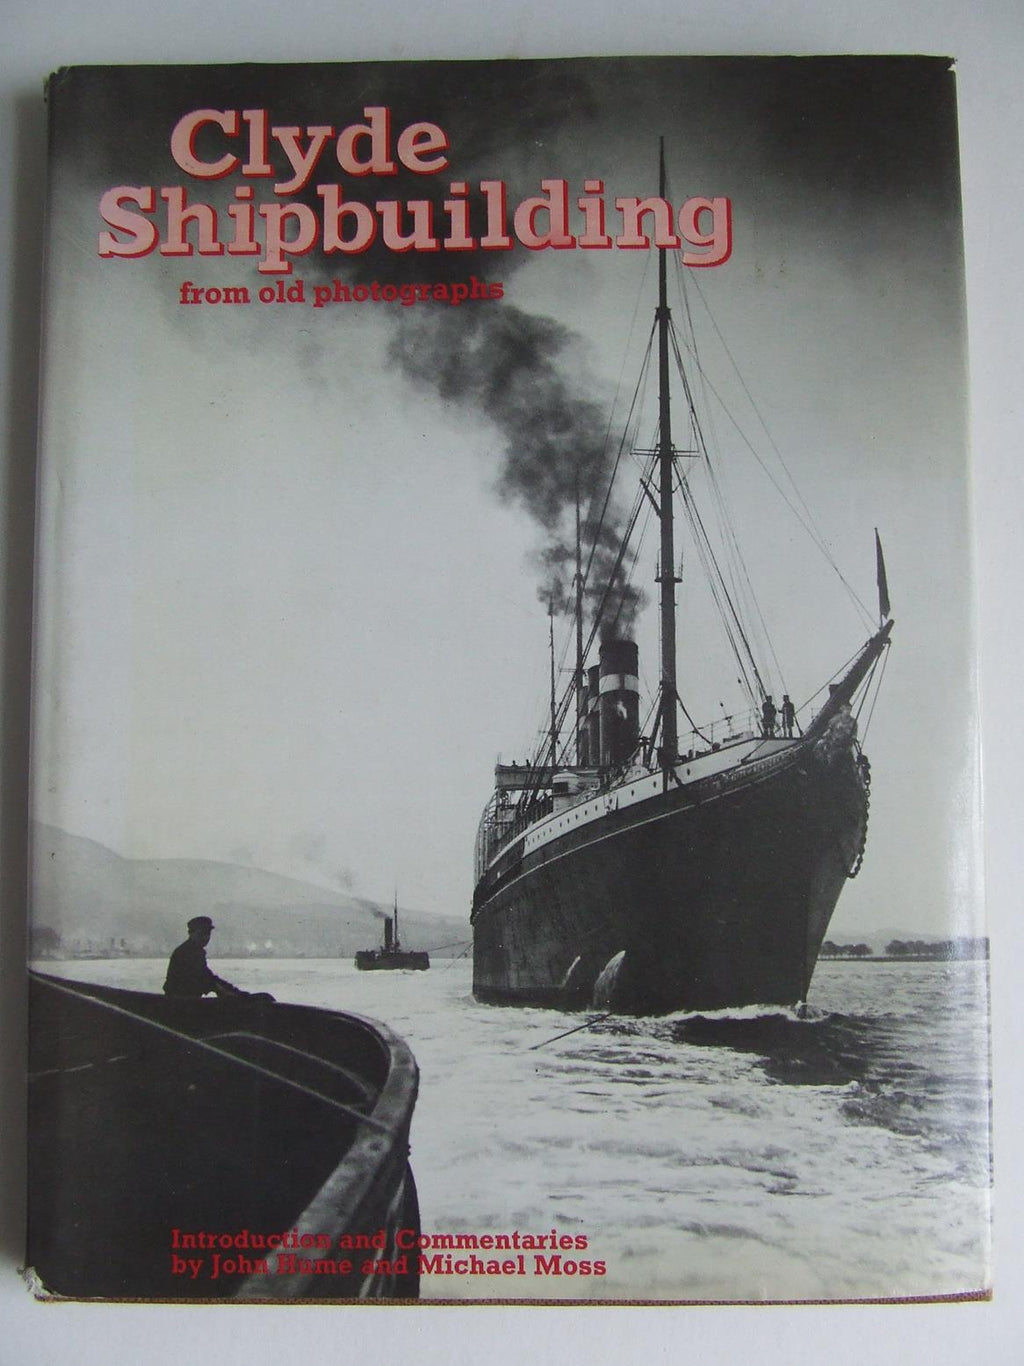 Clyde Shipbuilding from Old Photographs